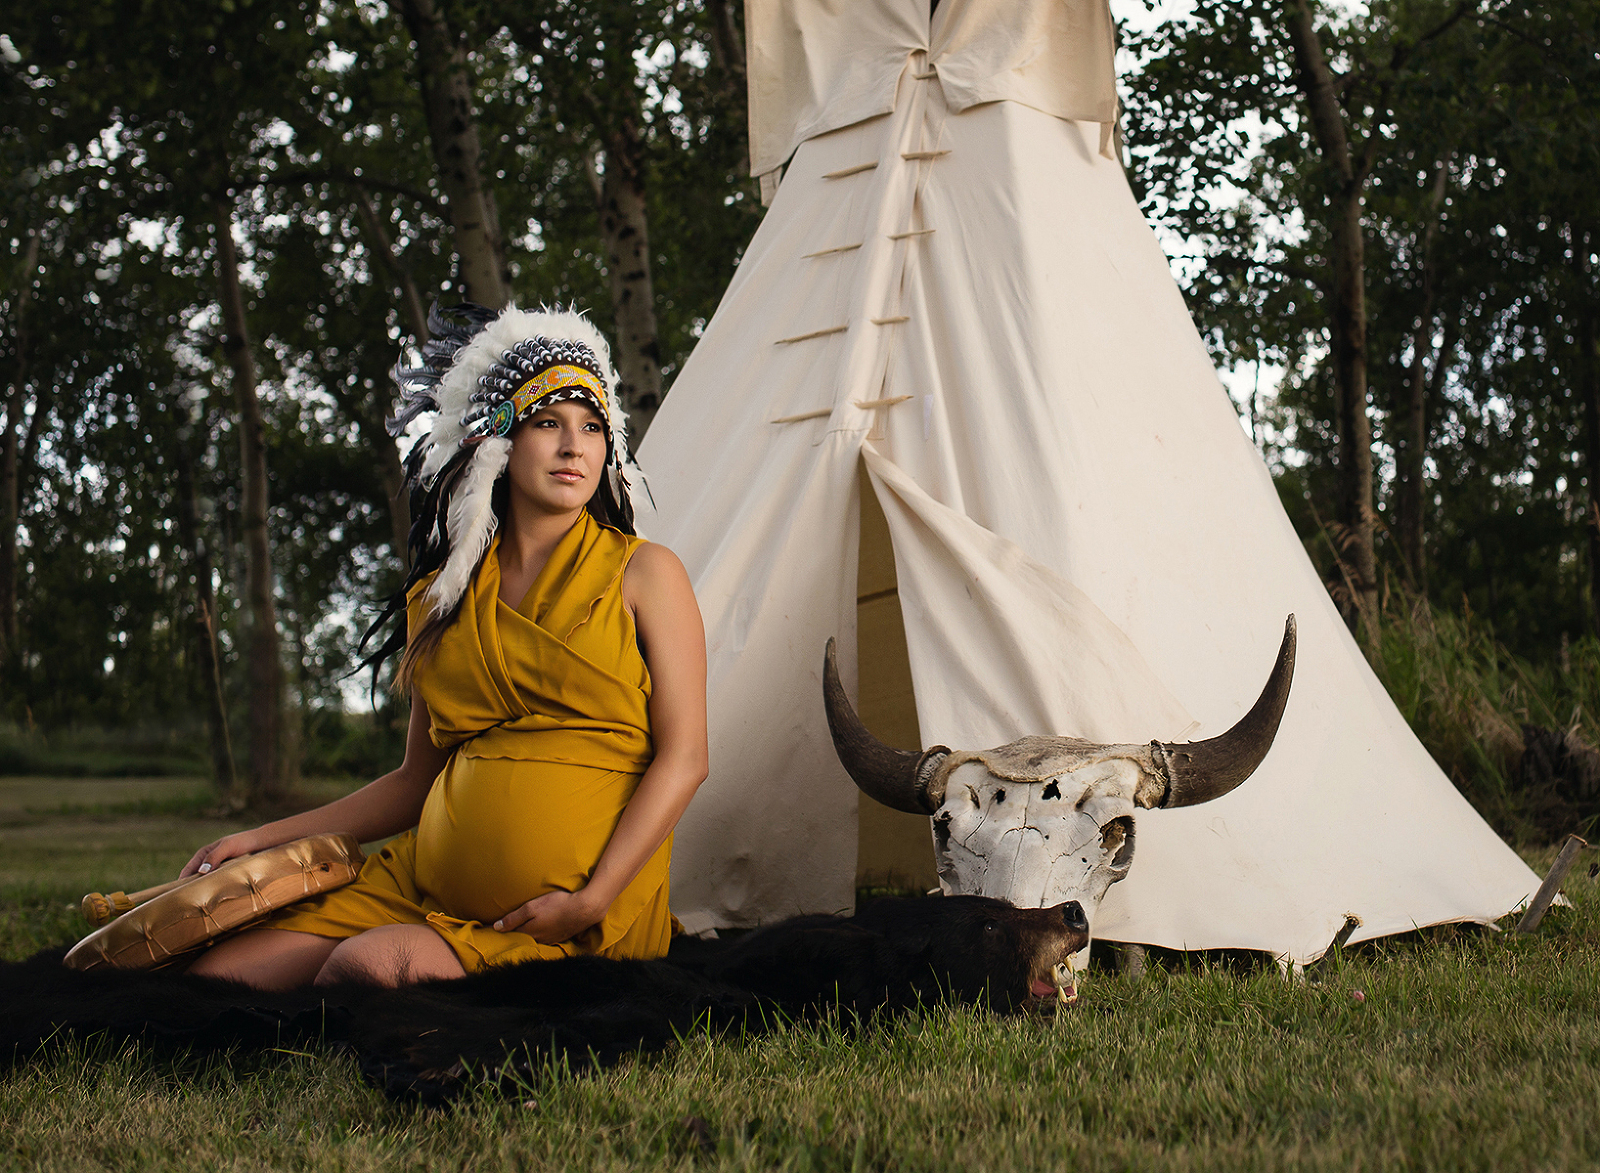 Outdoor maternity portrait in a forest, the pregnant Indigenous mother is wearing a native Indian headdress and is sitting in front of a beige tipi in an elegant yellow dress at sunset, looking off into the distance, an arm around her expectant belly, by the entrance to the wigwam. Image by Helga Himer Photography, Sudbury, Ontario.